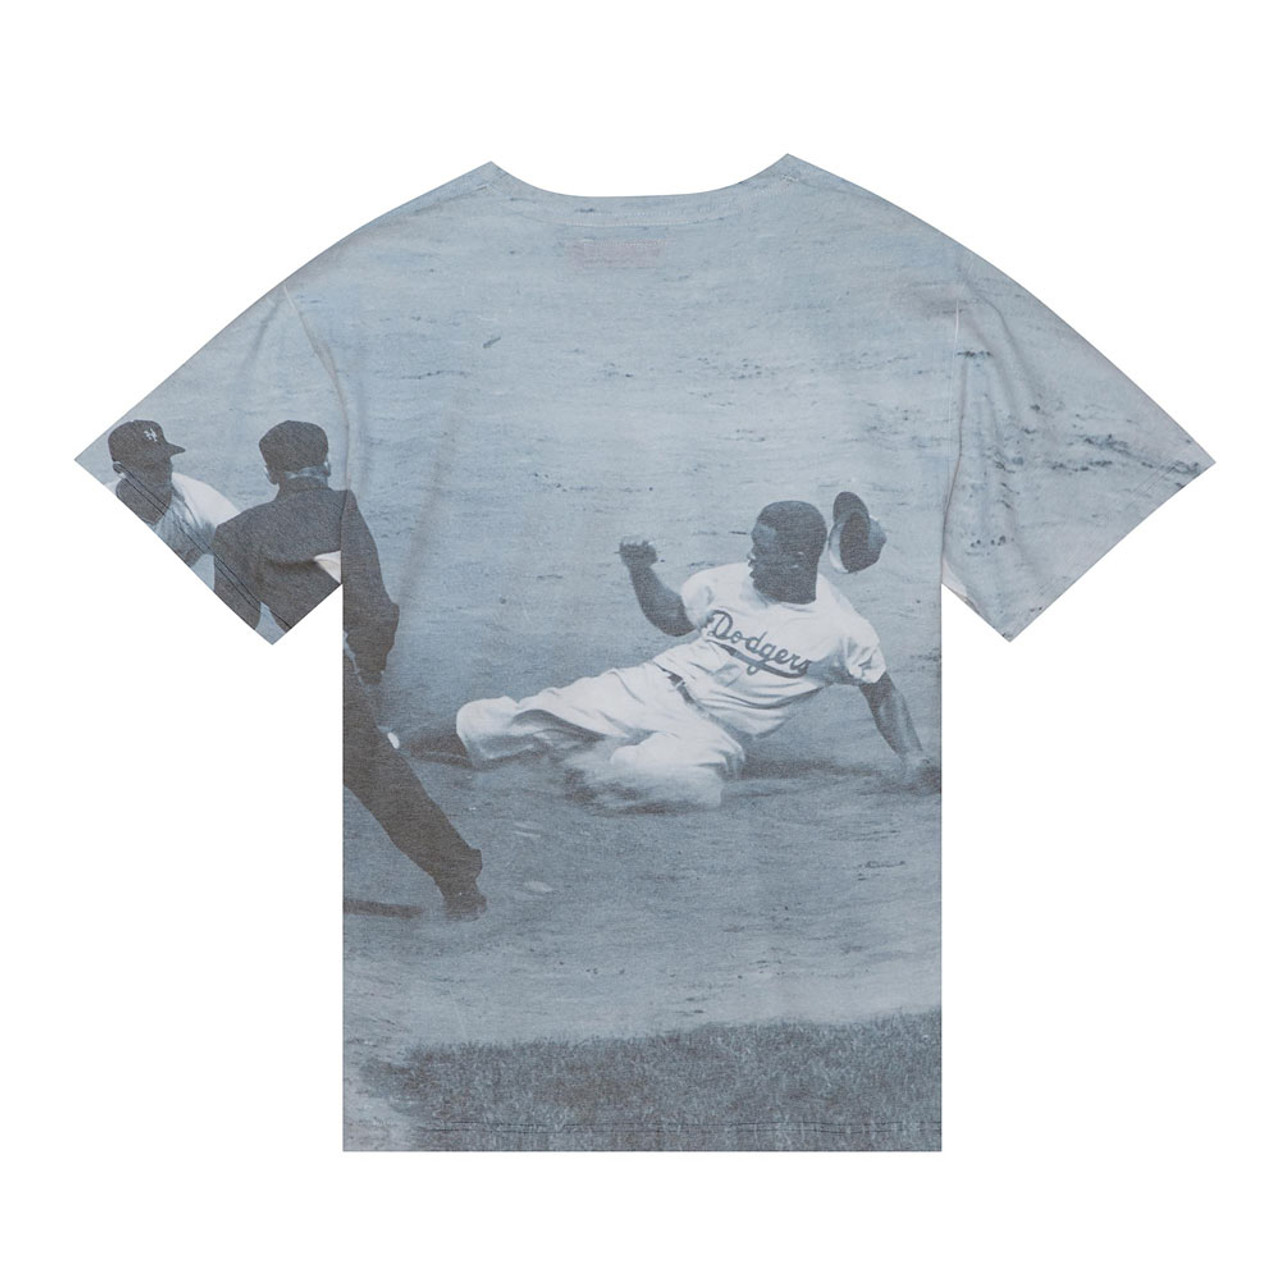 Jackie Robinson Brooklyn Dodgers Sublimated Player Tee